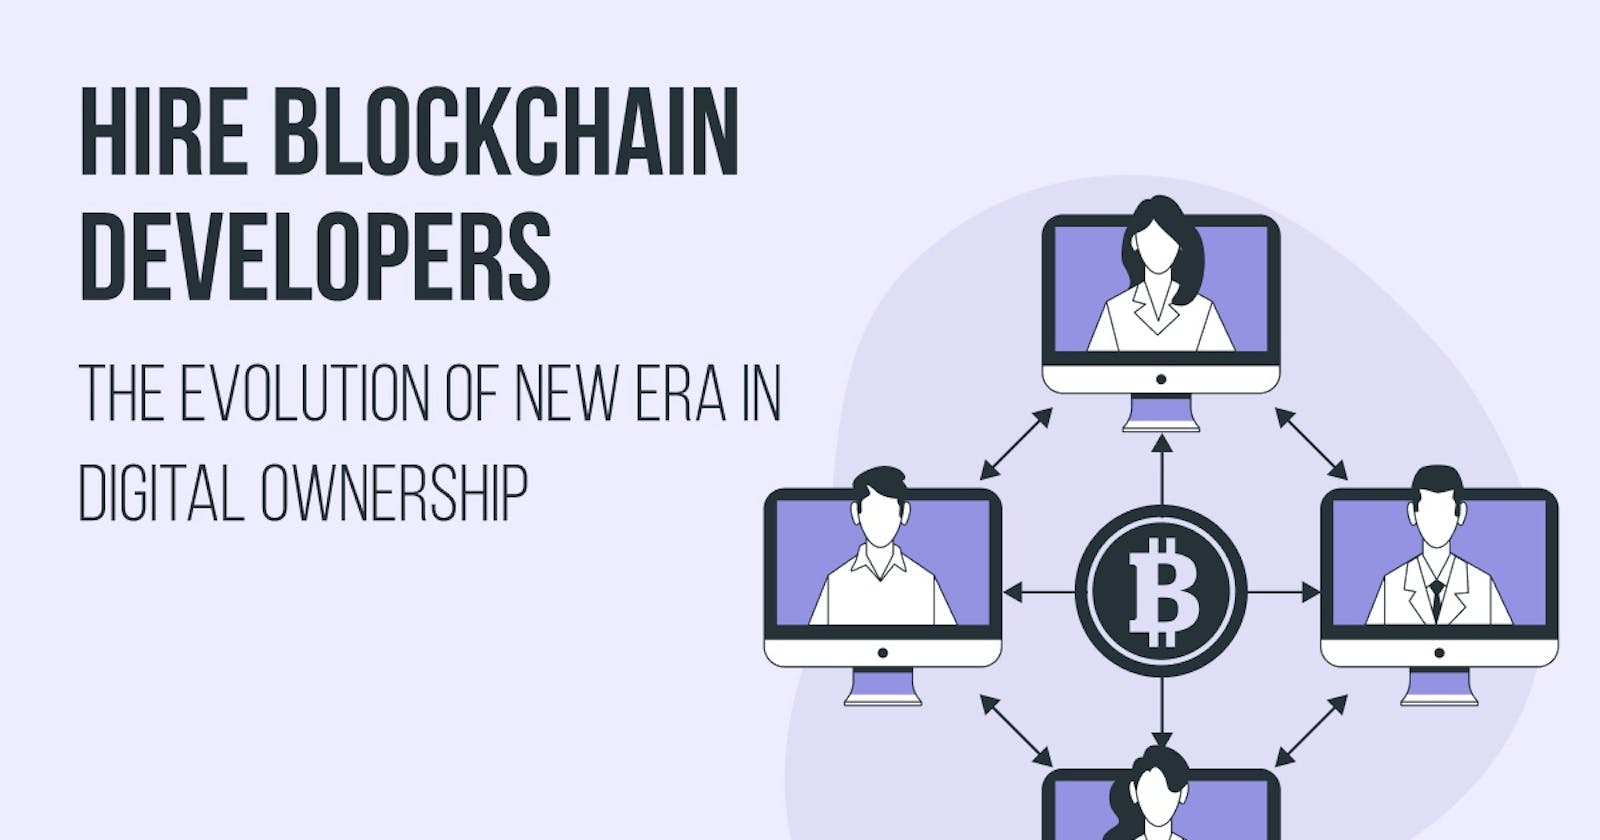 Hire Blockchain Developers The Evolution of New Era in Digital Ownership